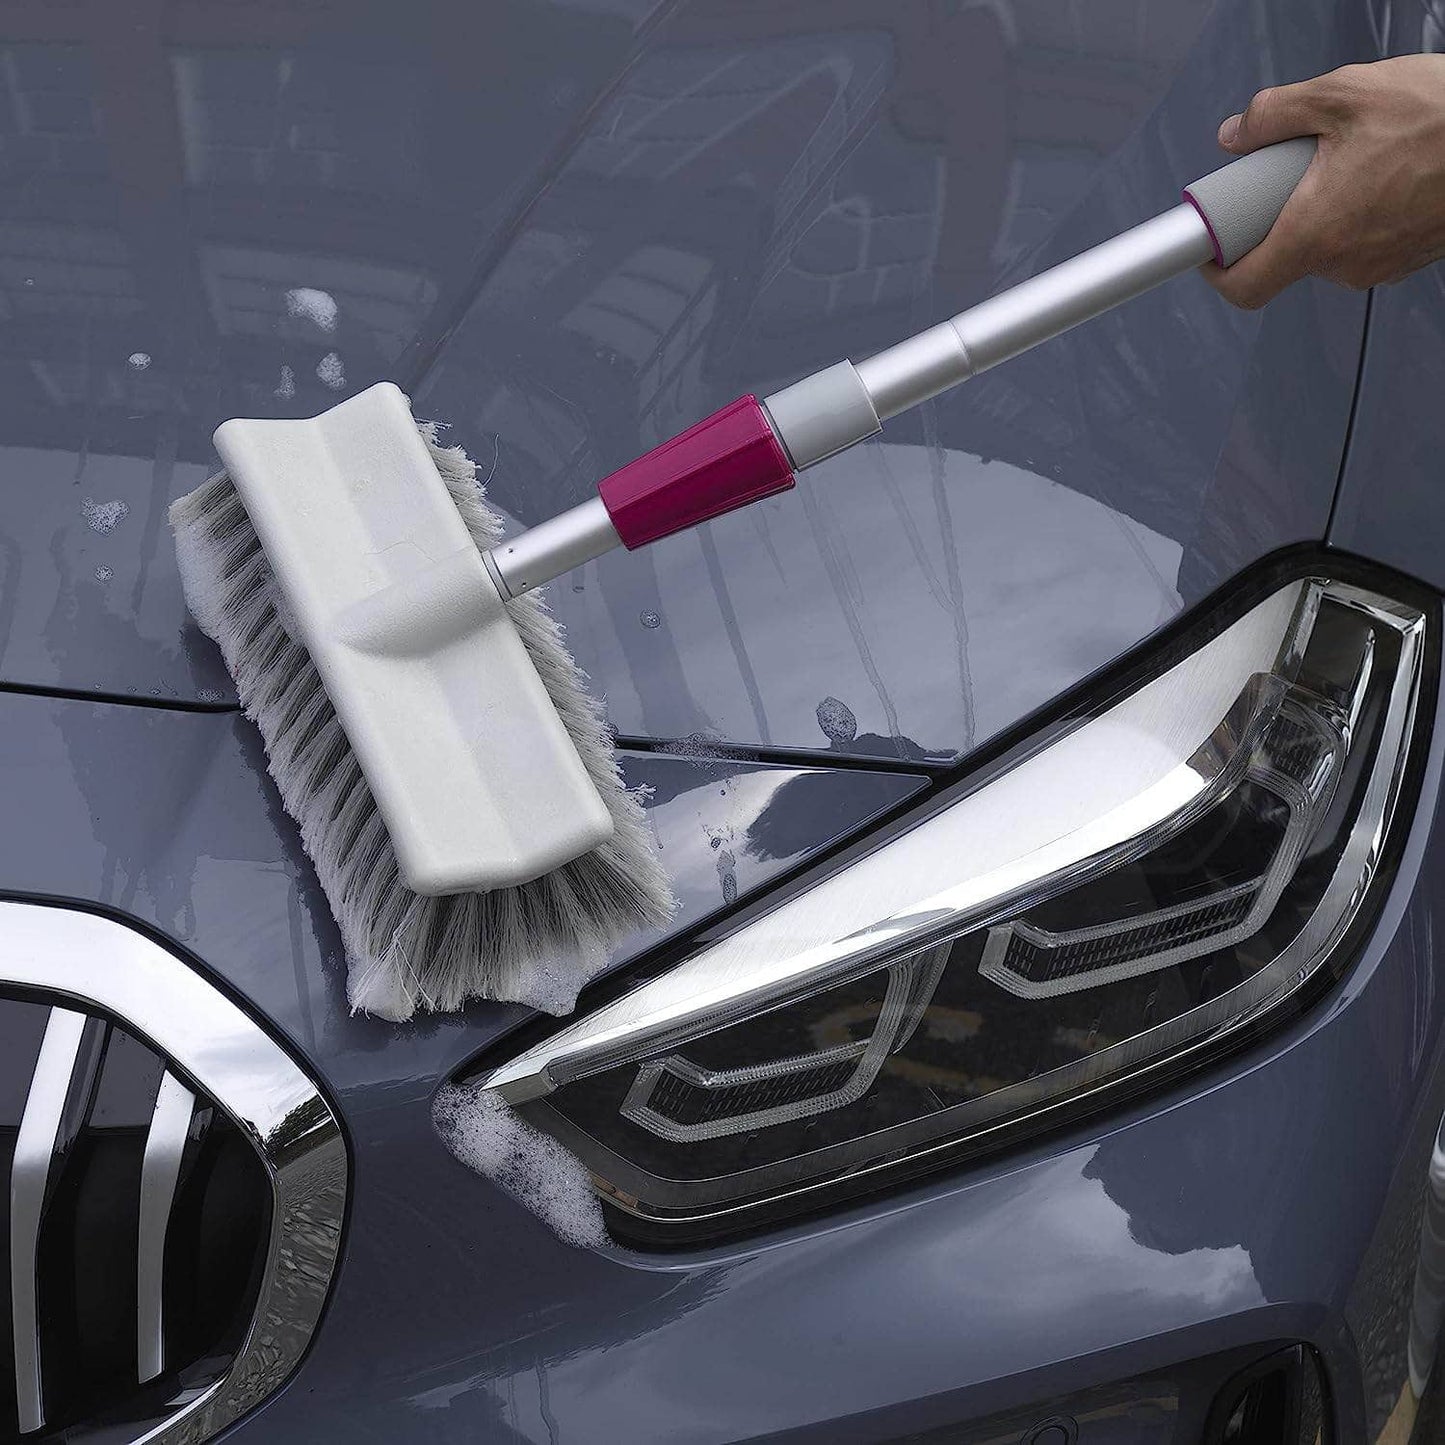 Kitchenware  -  Water Fed Car Cleaning Brush  -  60004893